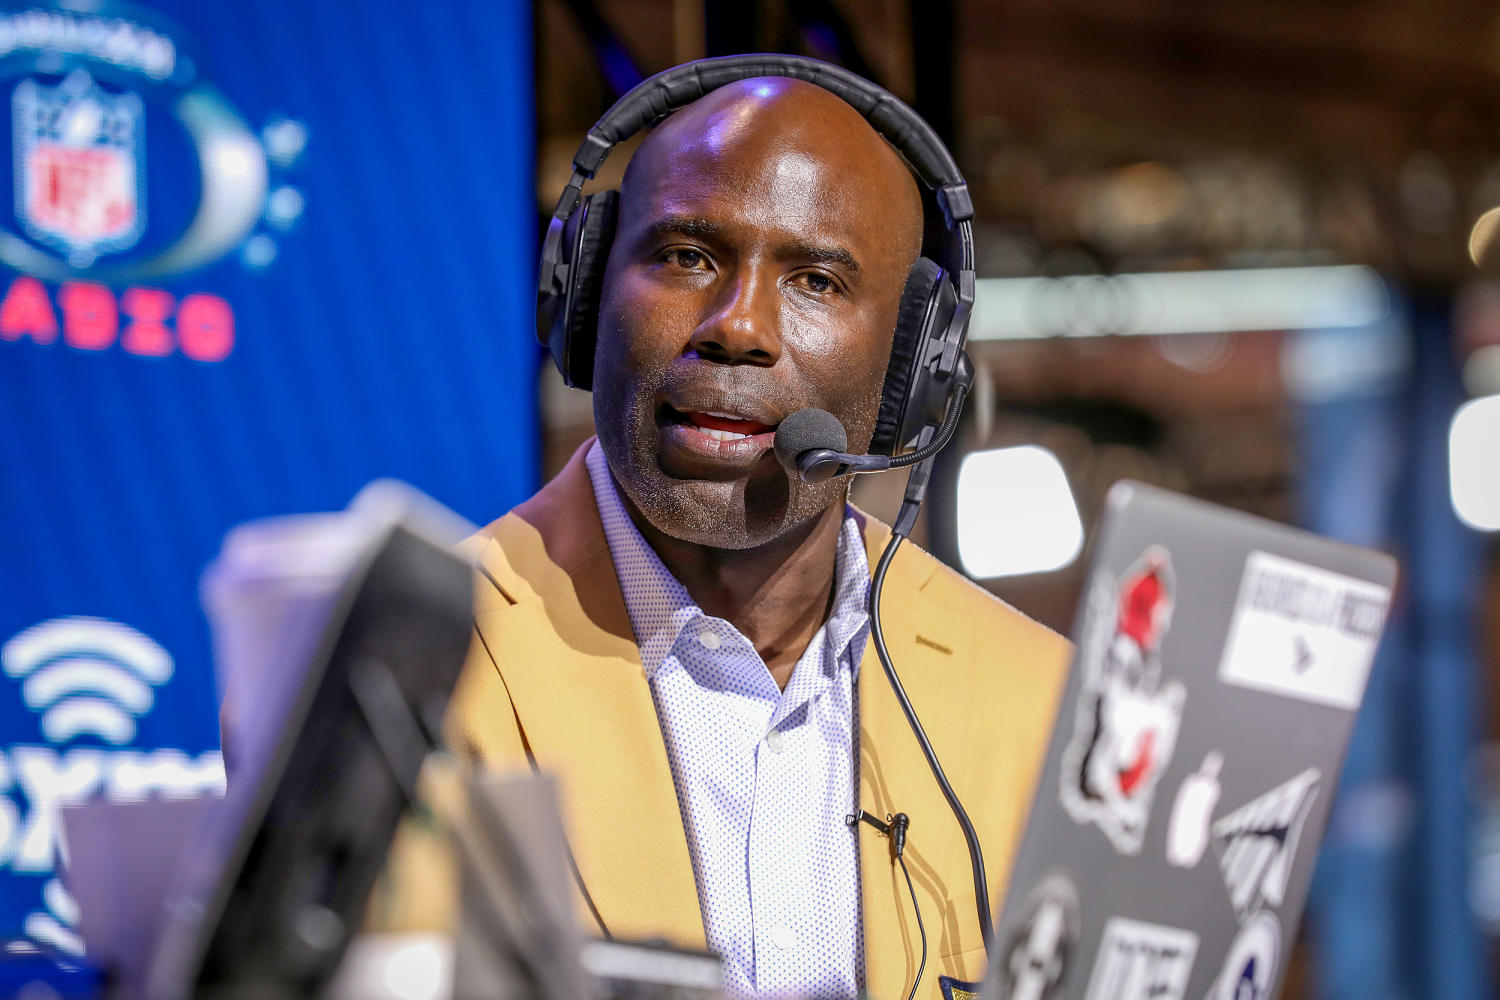 Football Hall of Famer Terrell Davis believes race played role in handcuff removal from United flight